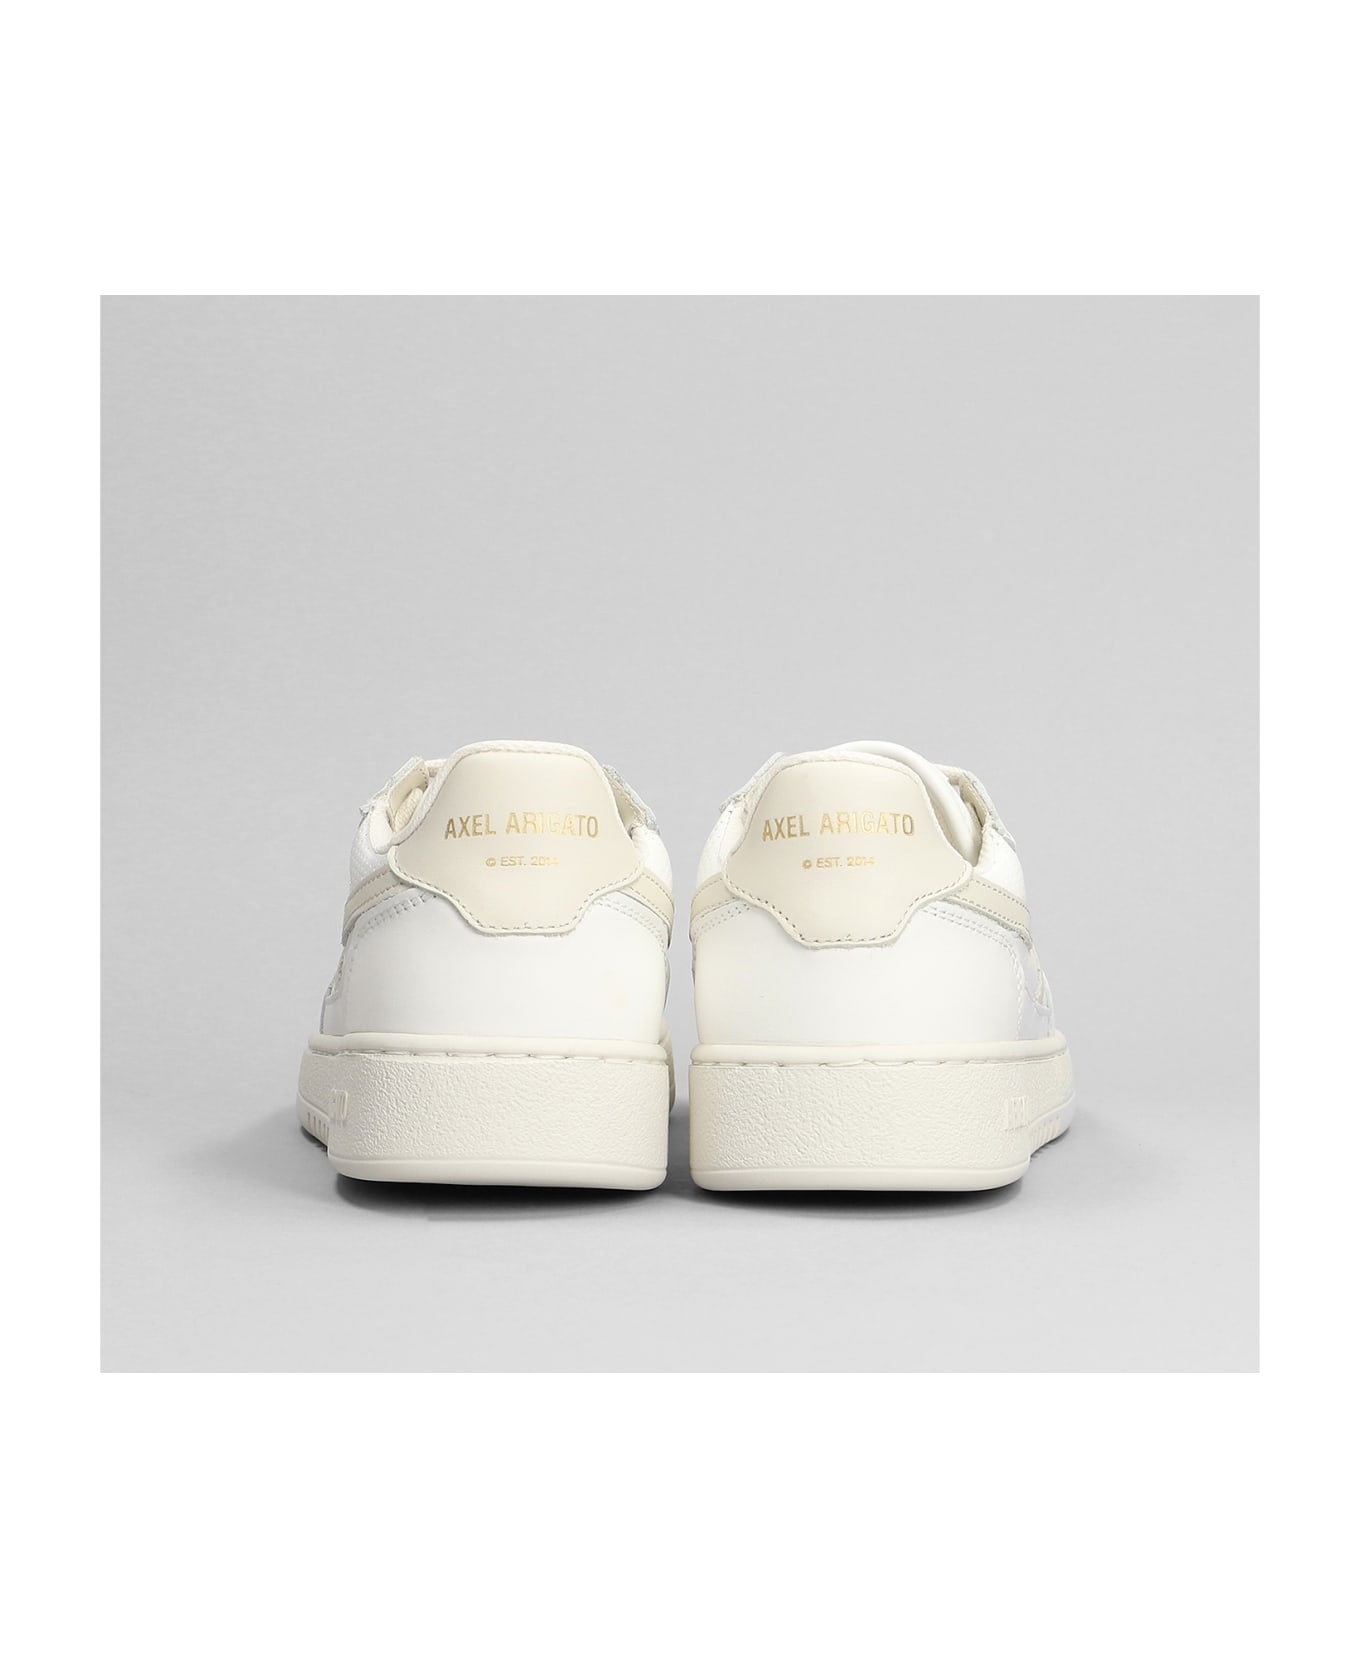 Dice-a Sneaker Sneakers In White Leather - 4